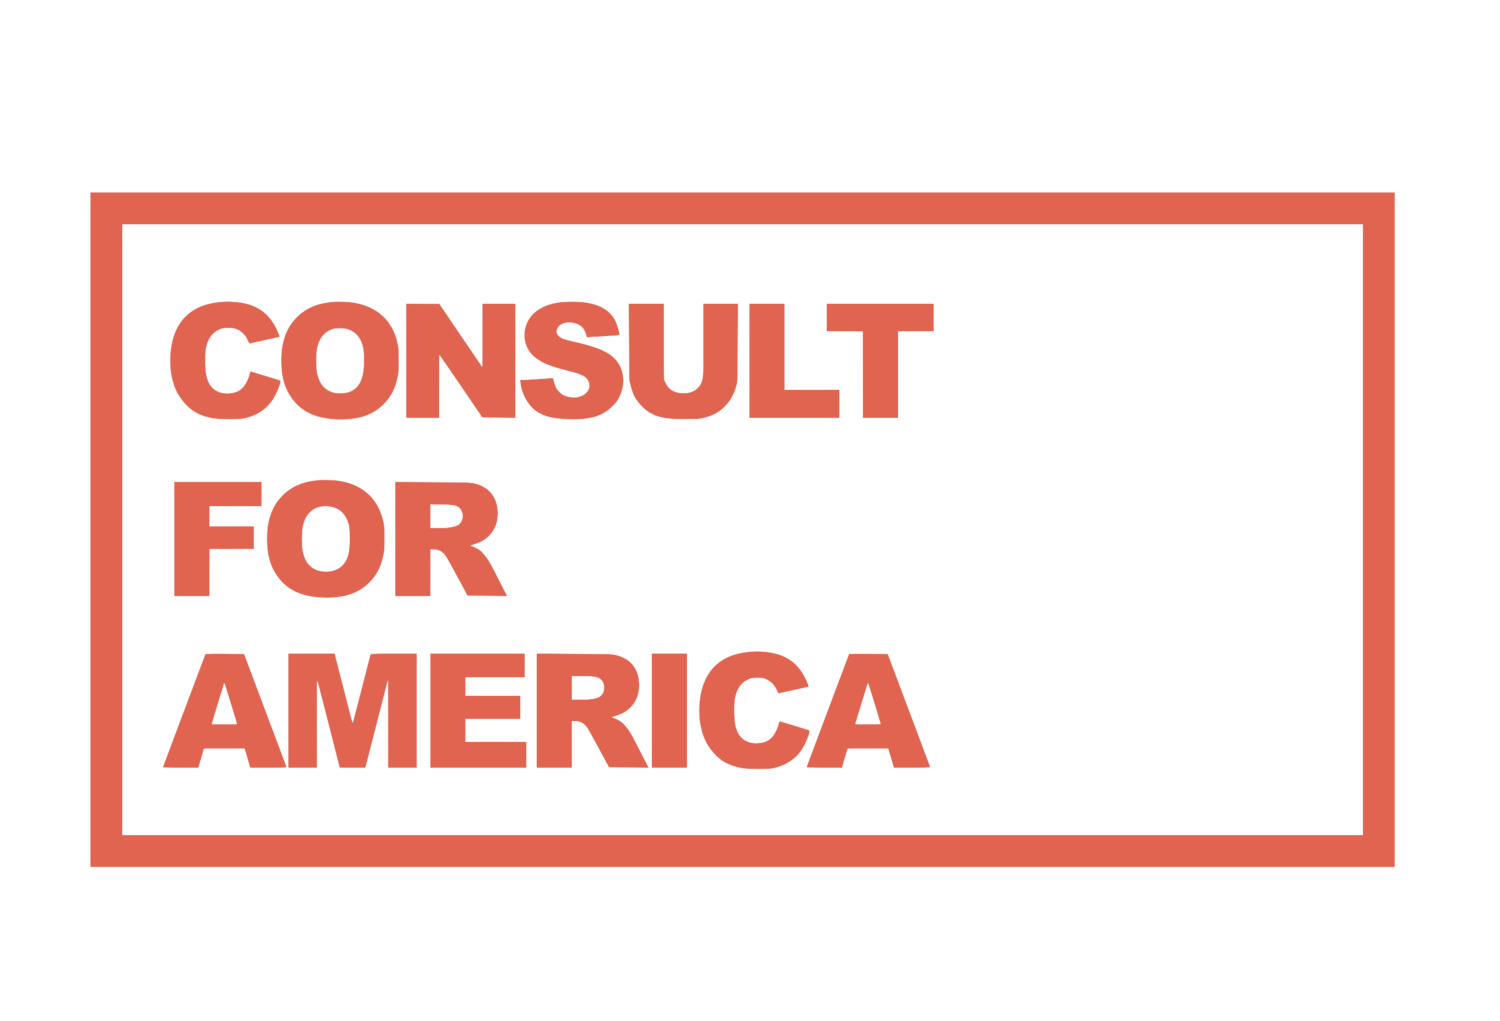 Consult for America